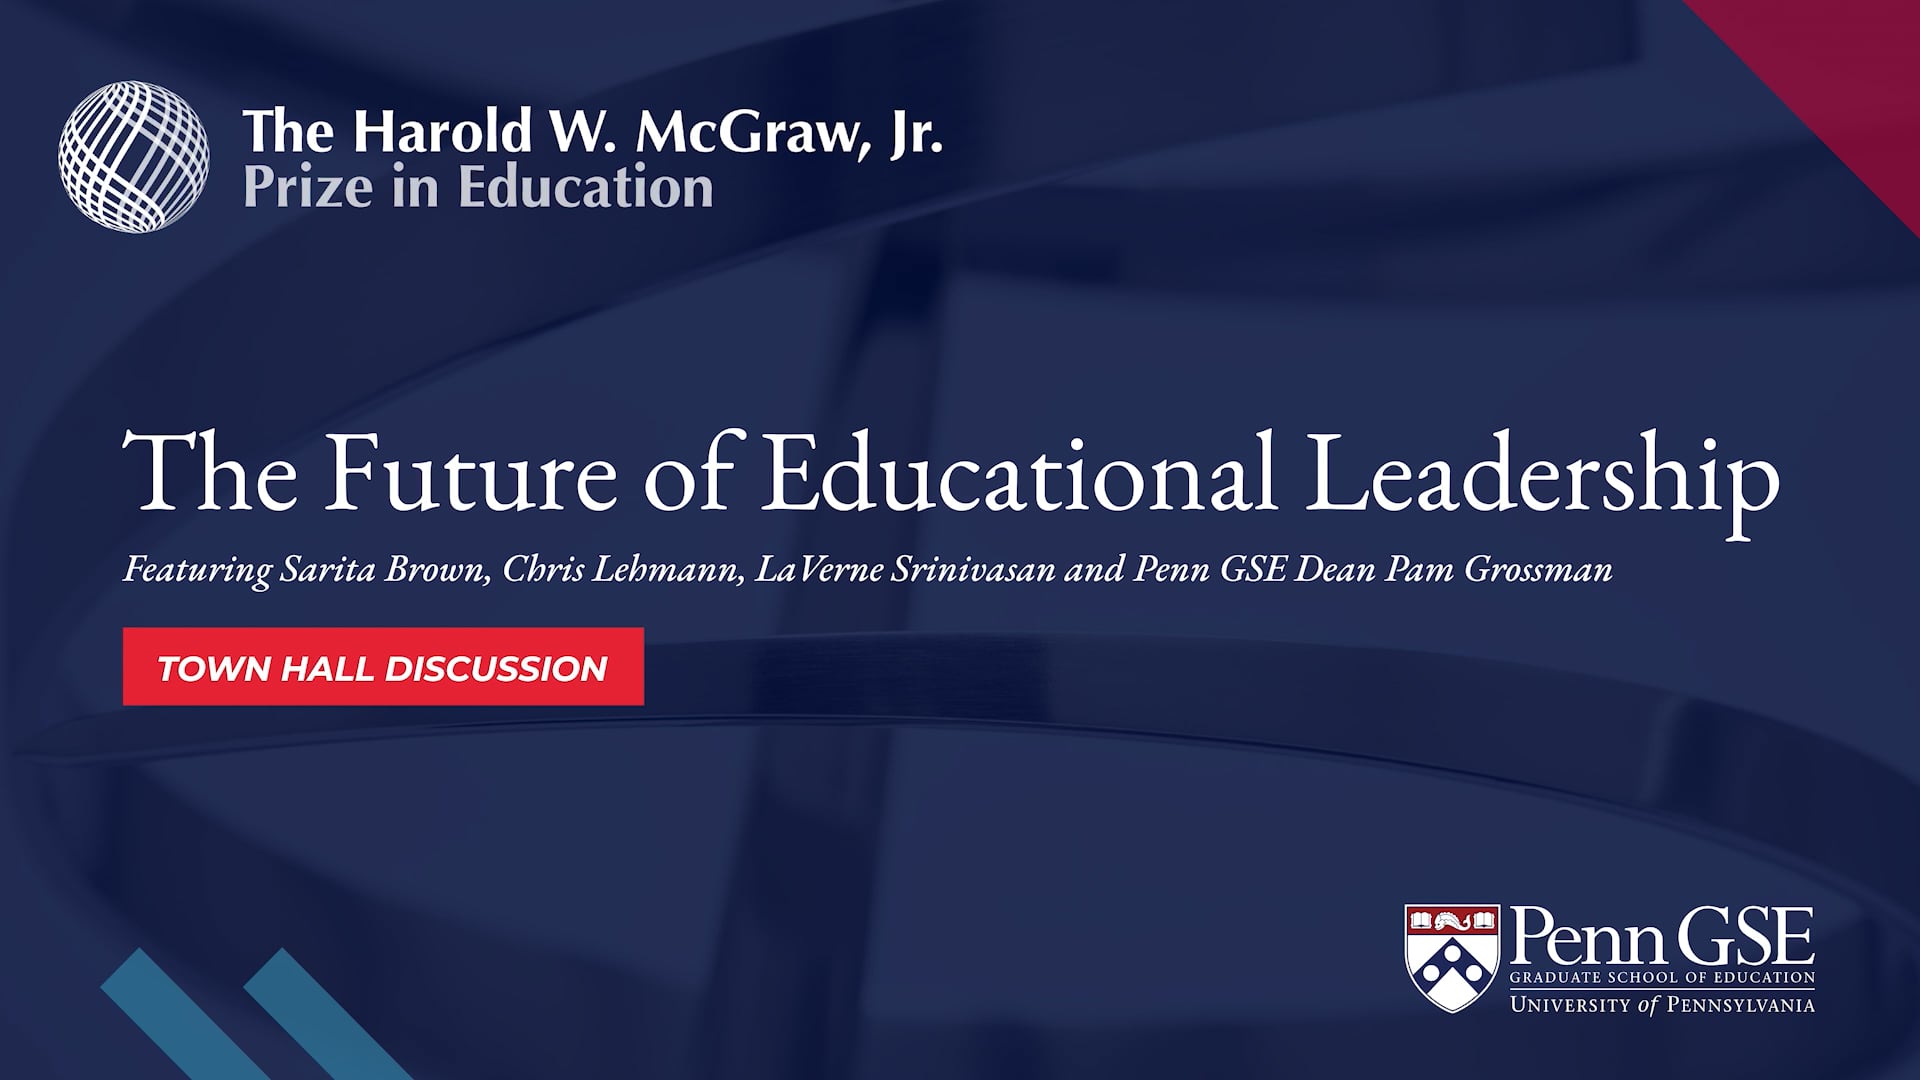 Play video: Town Hall Discussion on the Future of Educational Leadership